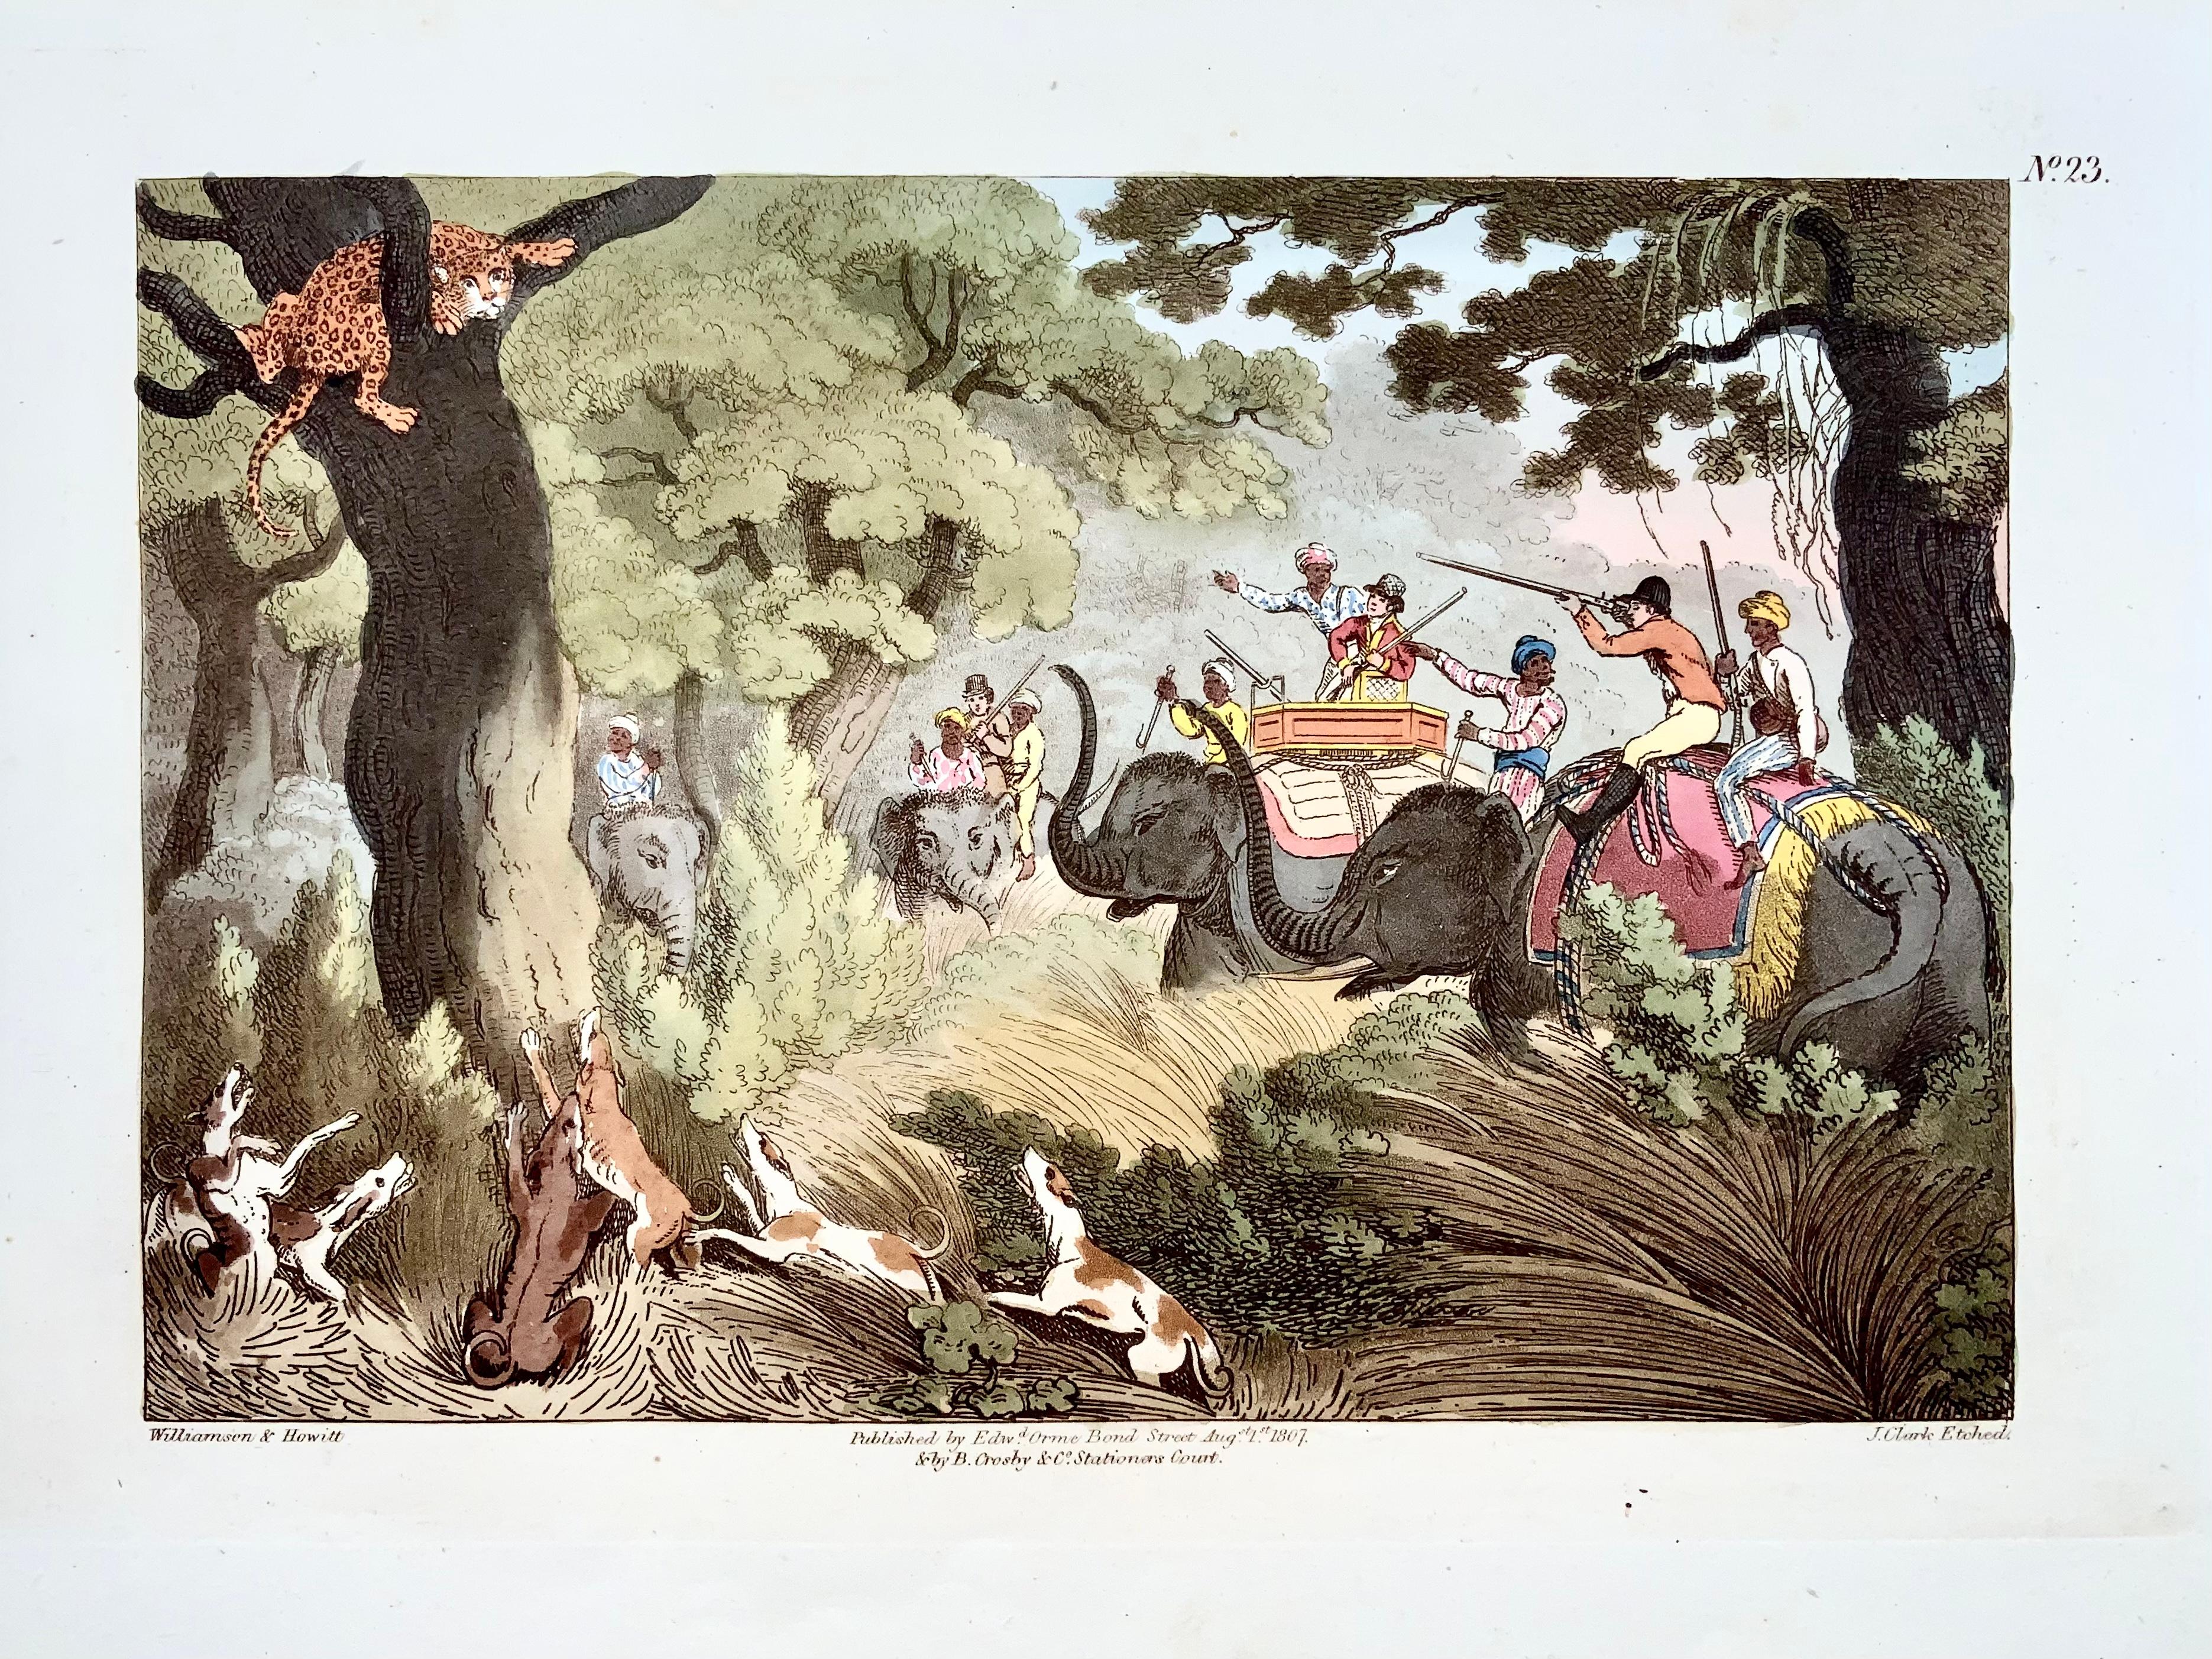 Thomas Williamson (1758-1817) and Samuel Howitt (1765-1822)

Tiger Hunt

From: Oriental Field Sports being a complete, detailed, and accurate description of the wild sports of the East and exhibiting, in a novel and interesting manner, the